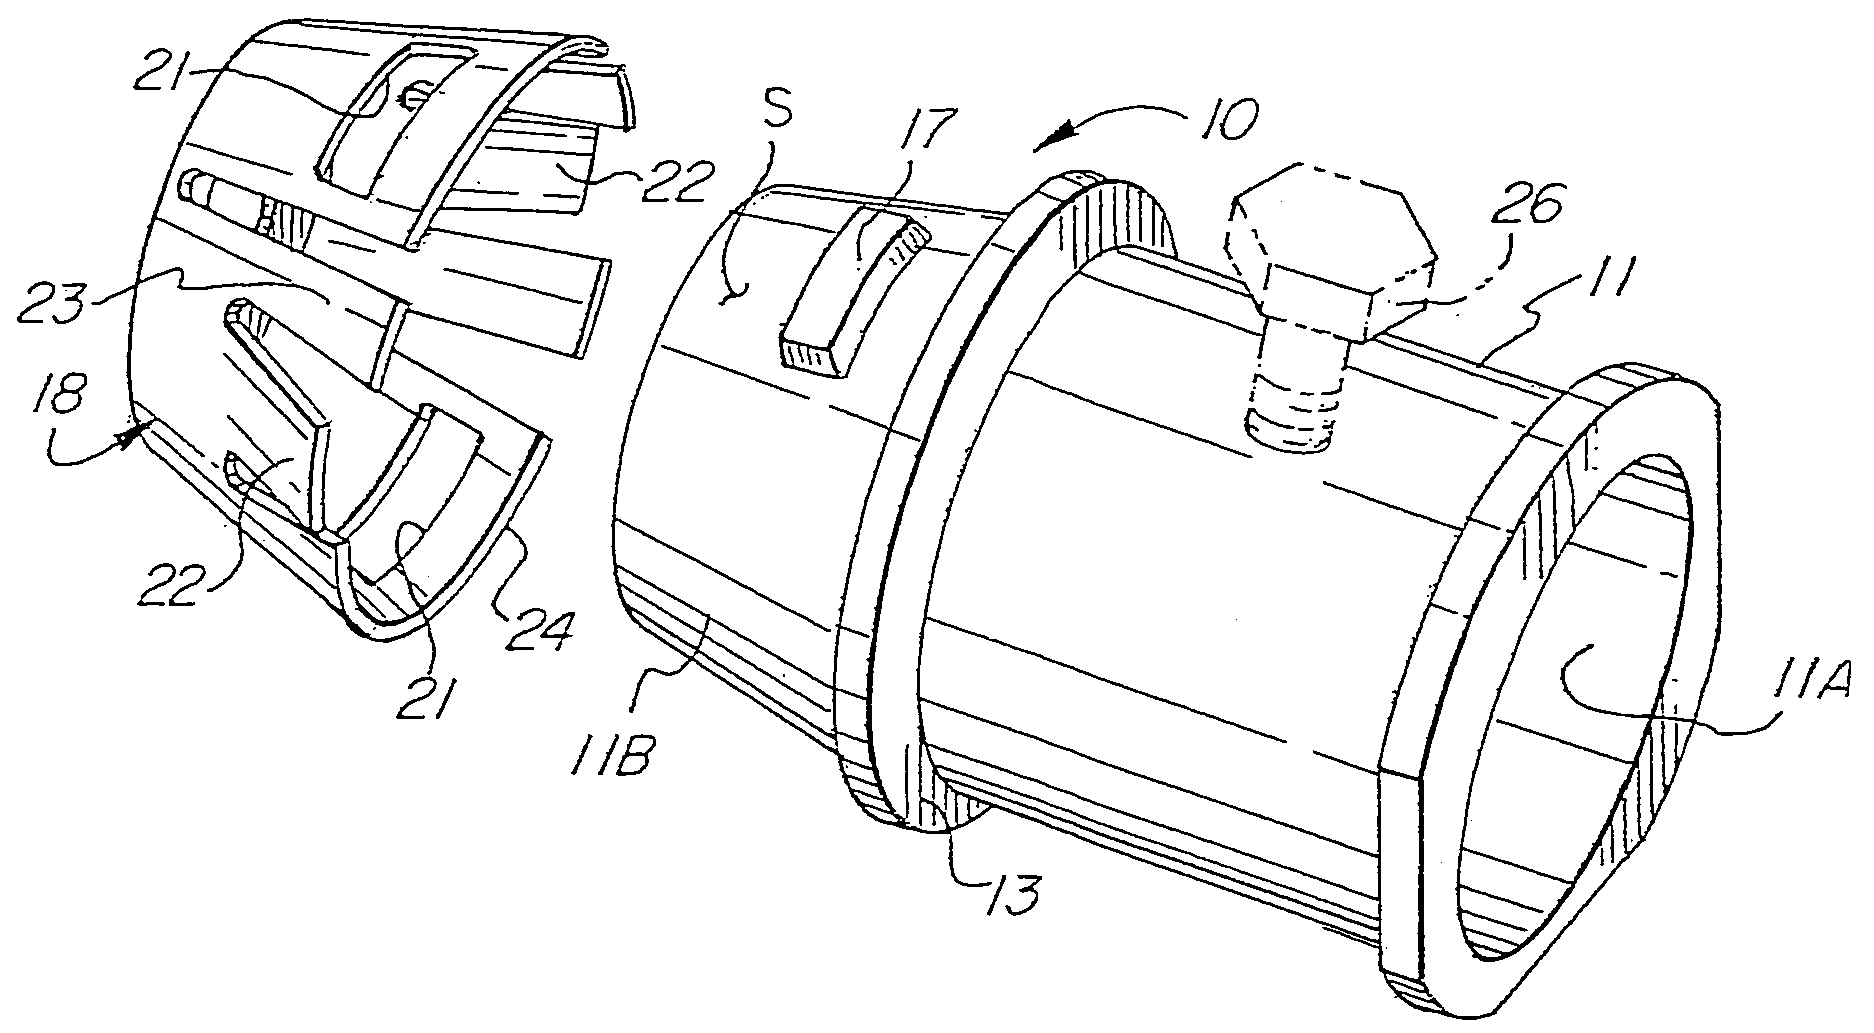 Snap fit electrical connector assembly with operating tool for facilitating the connection of a connector assembly to an electrical box